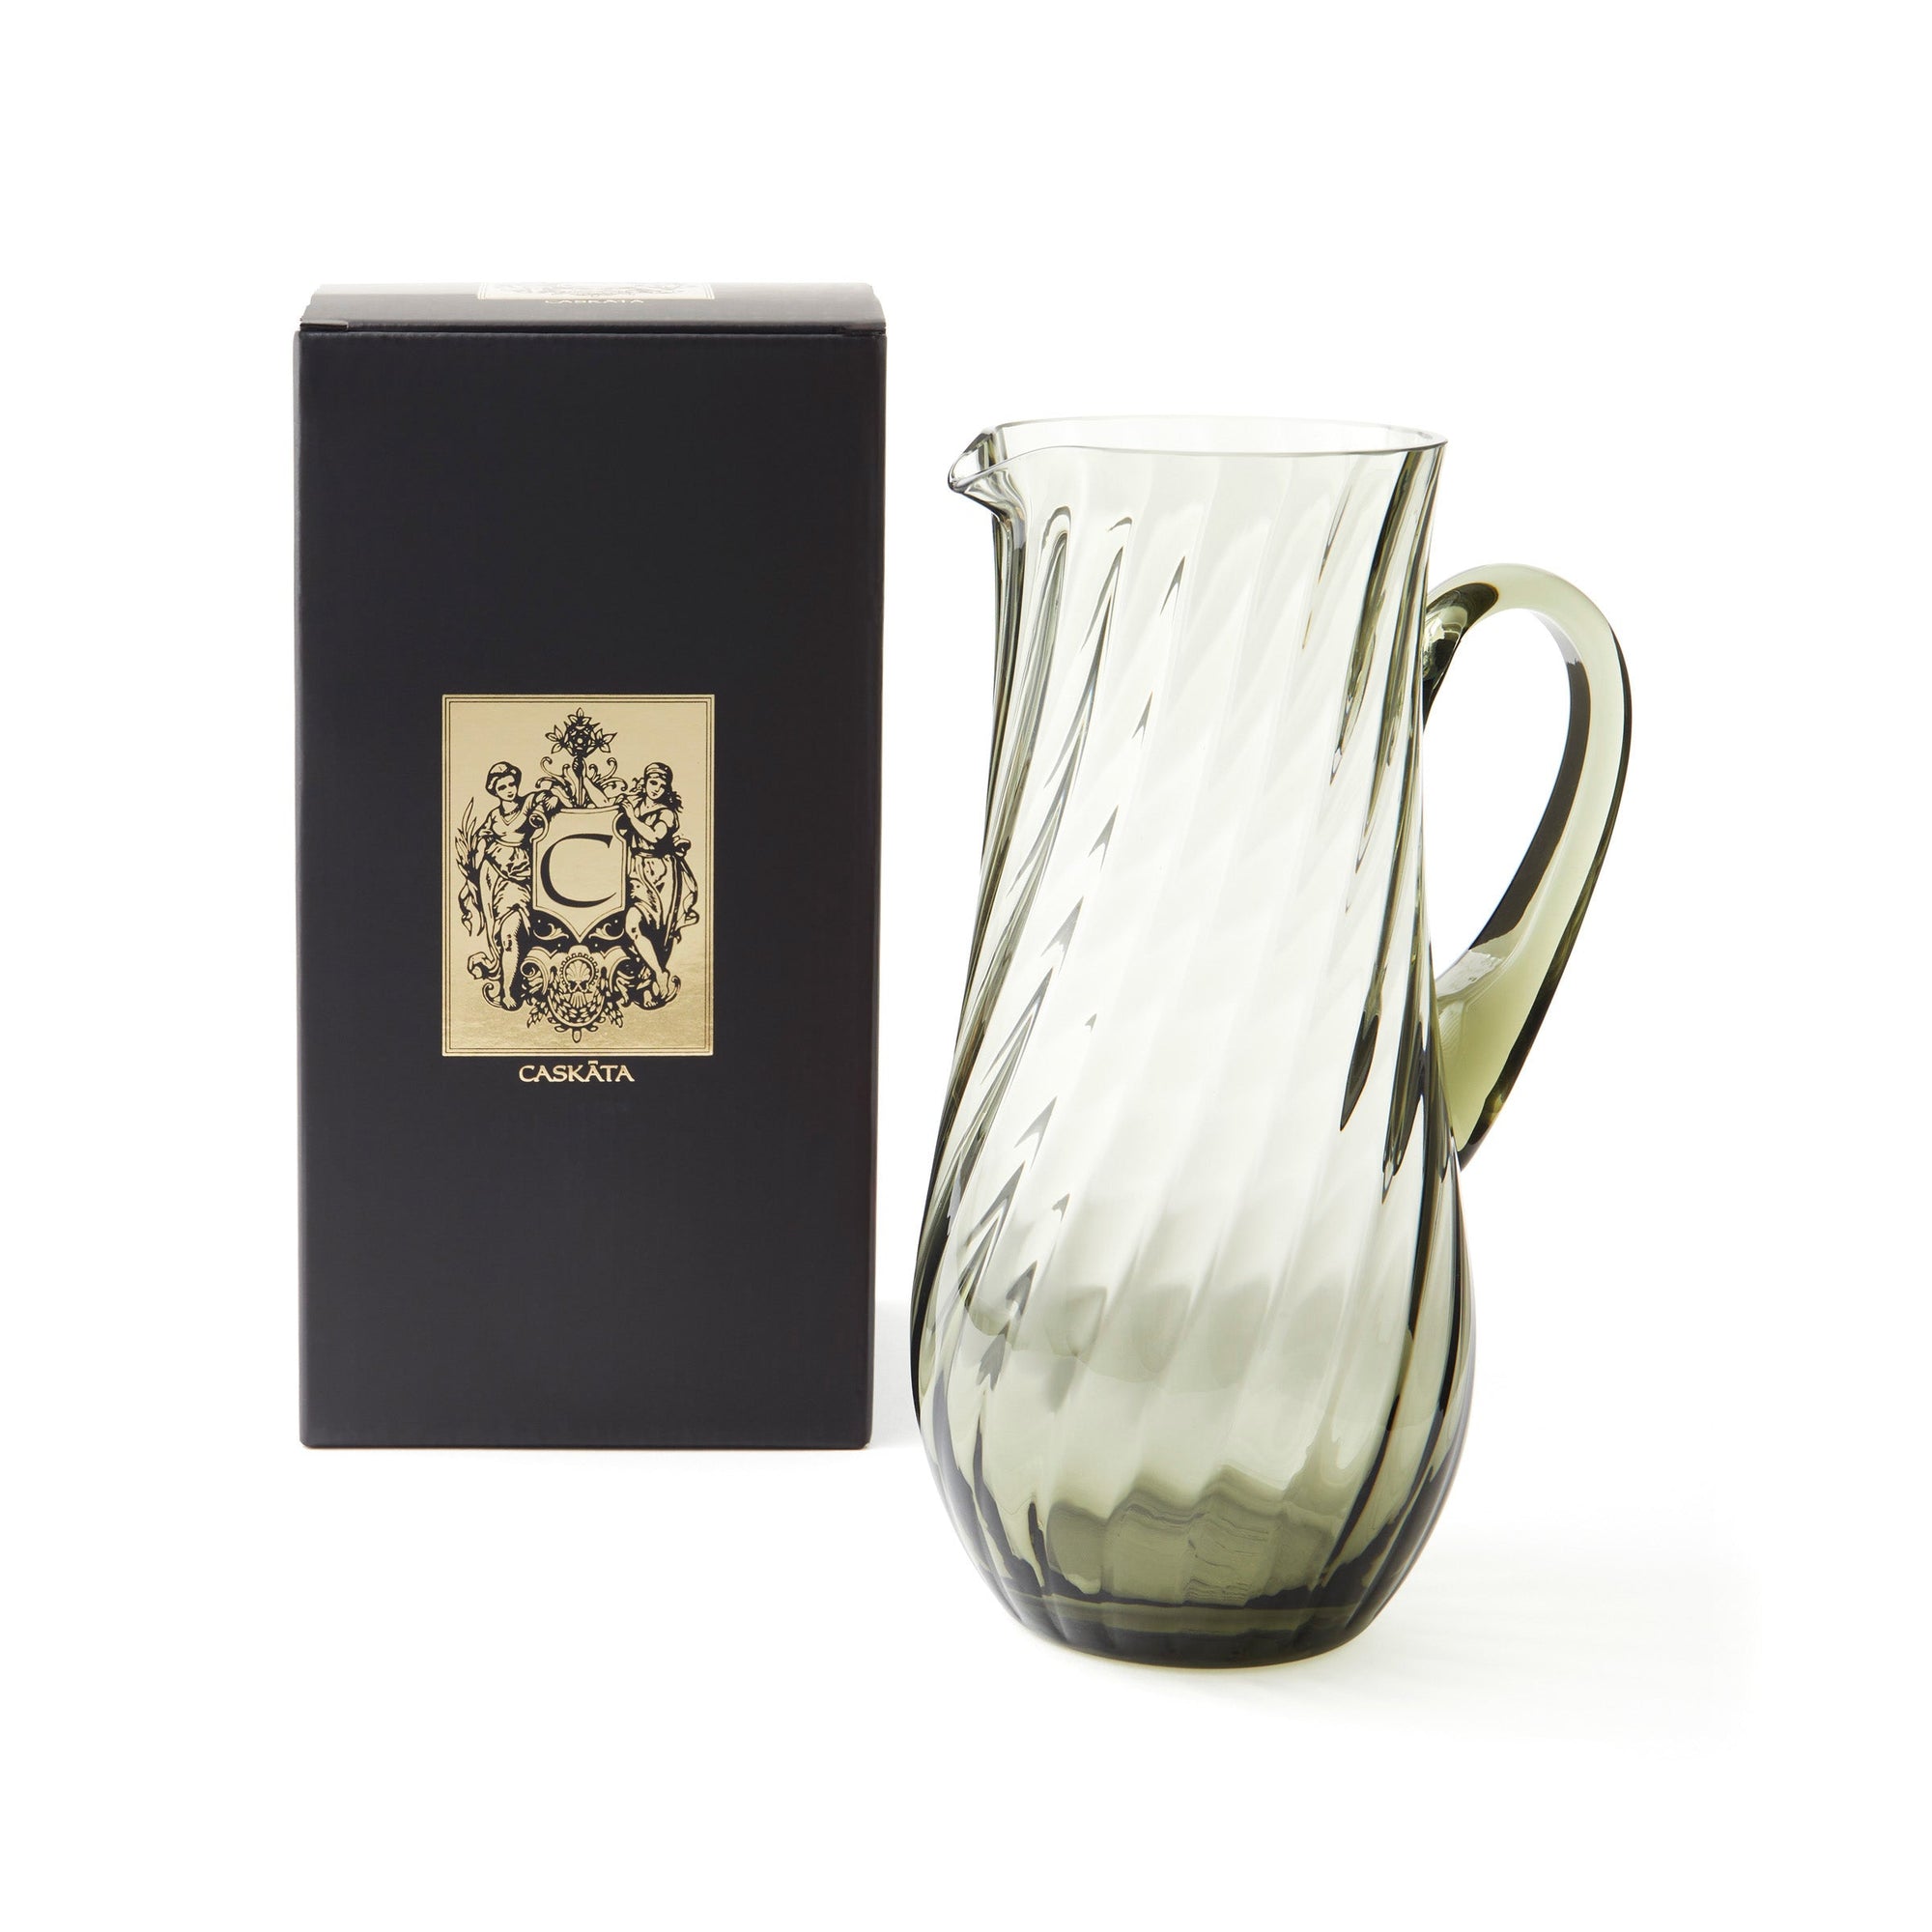 Quinn optic crystal pitcher in smoky green, mouth blown from Caskata